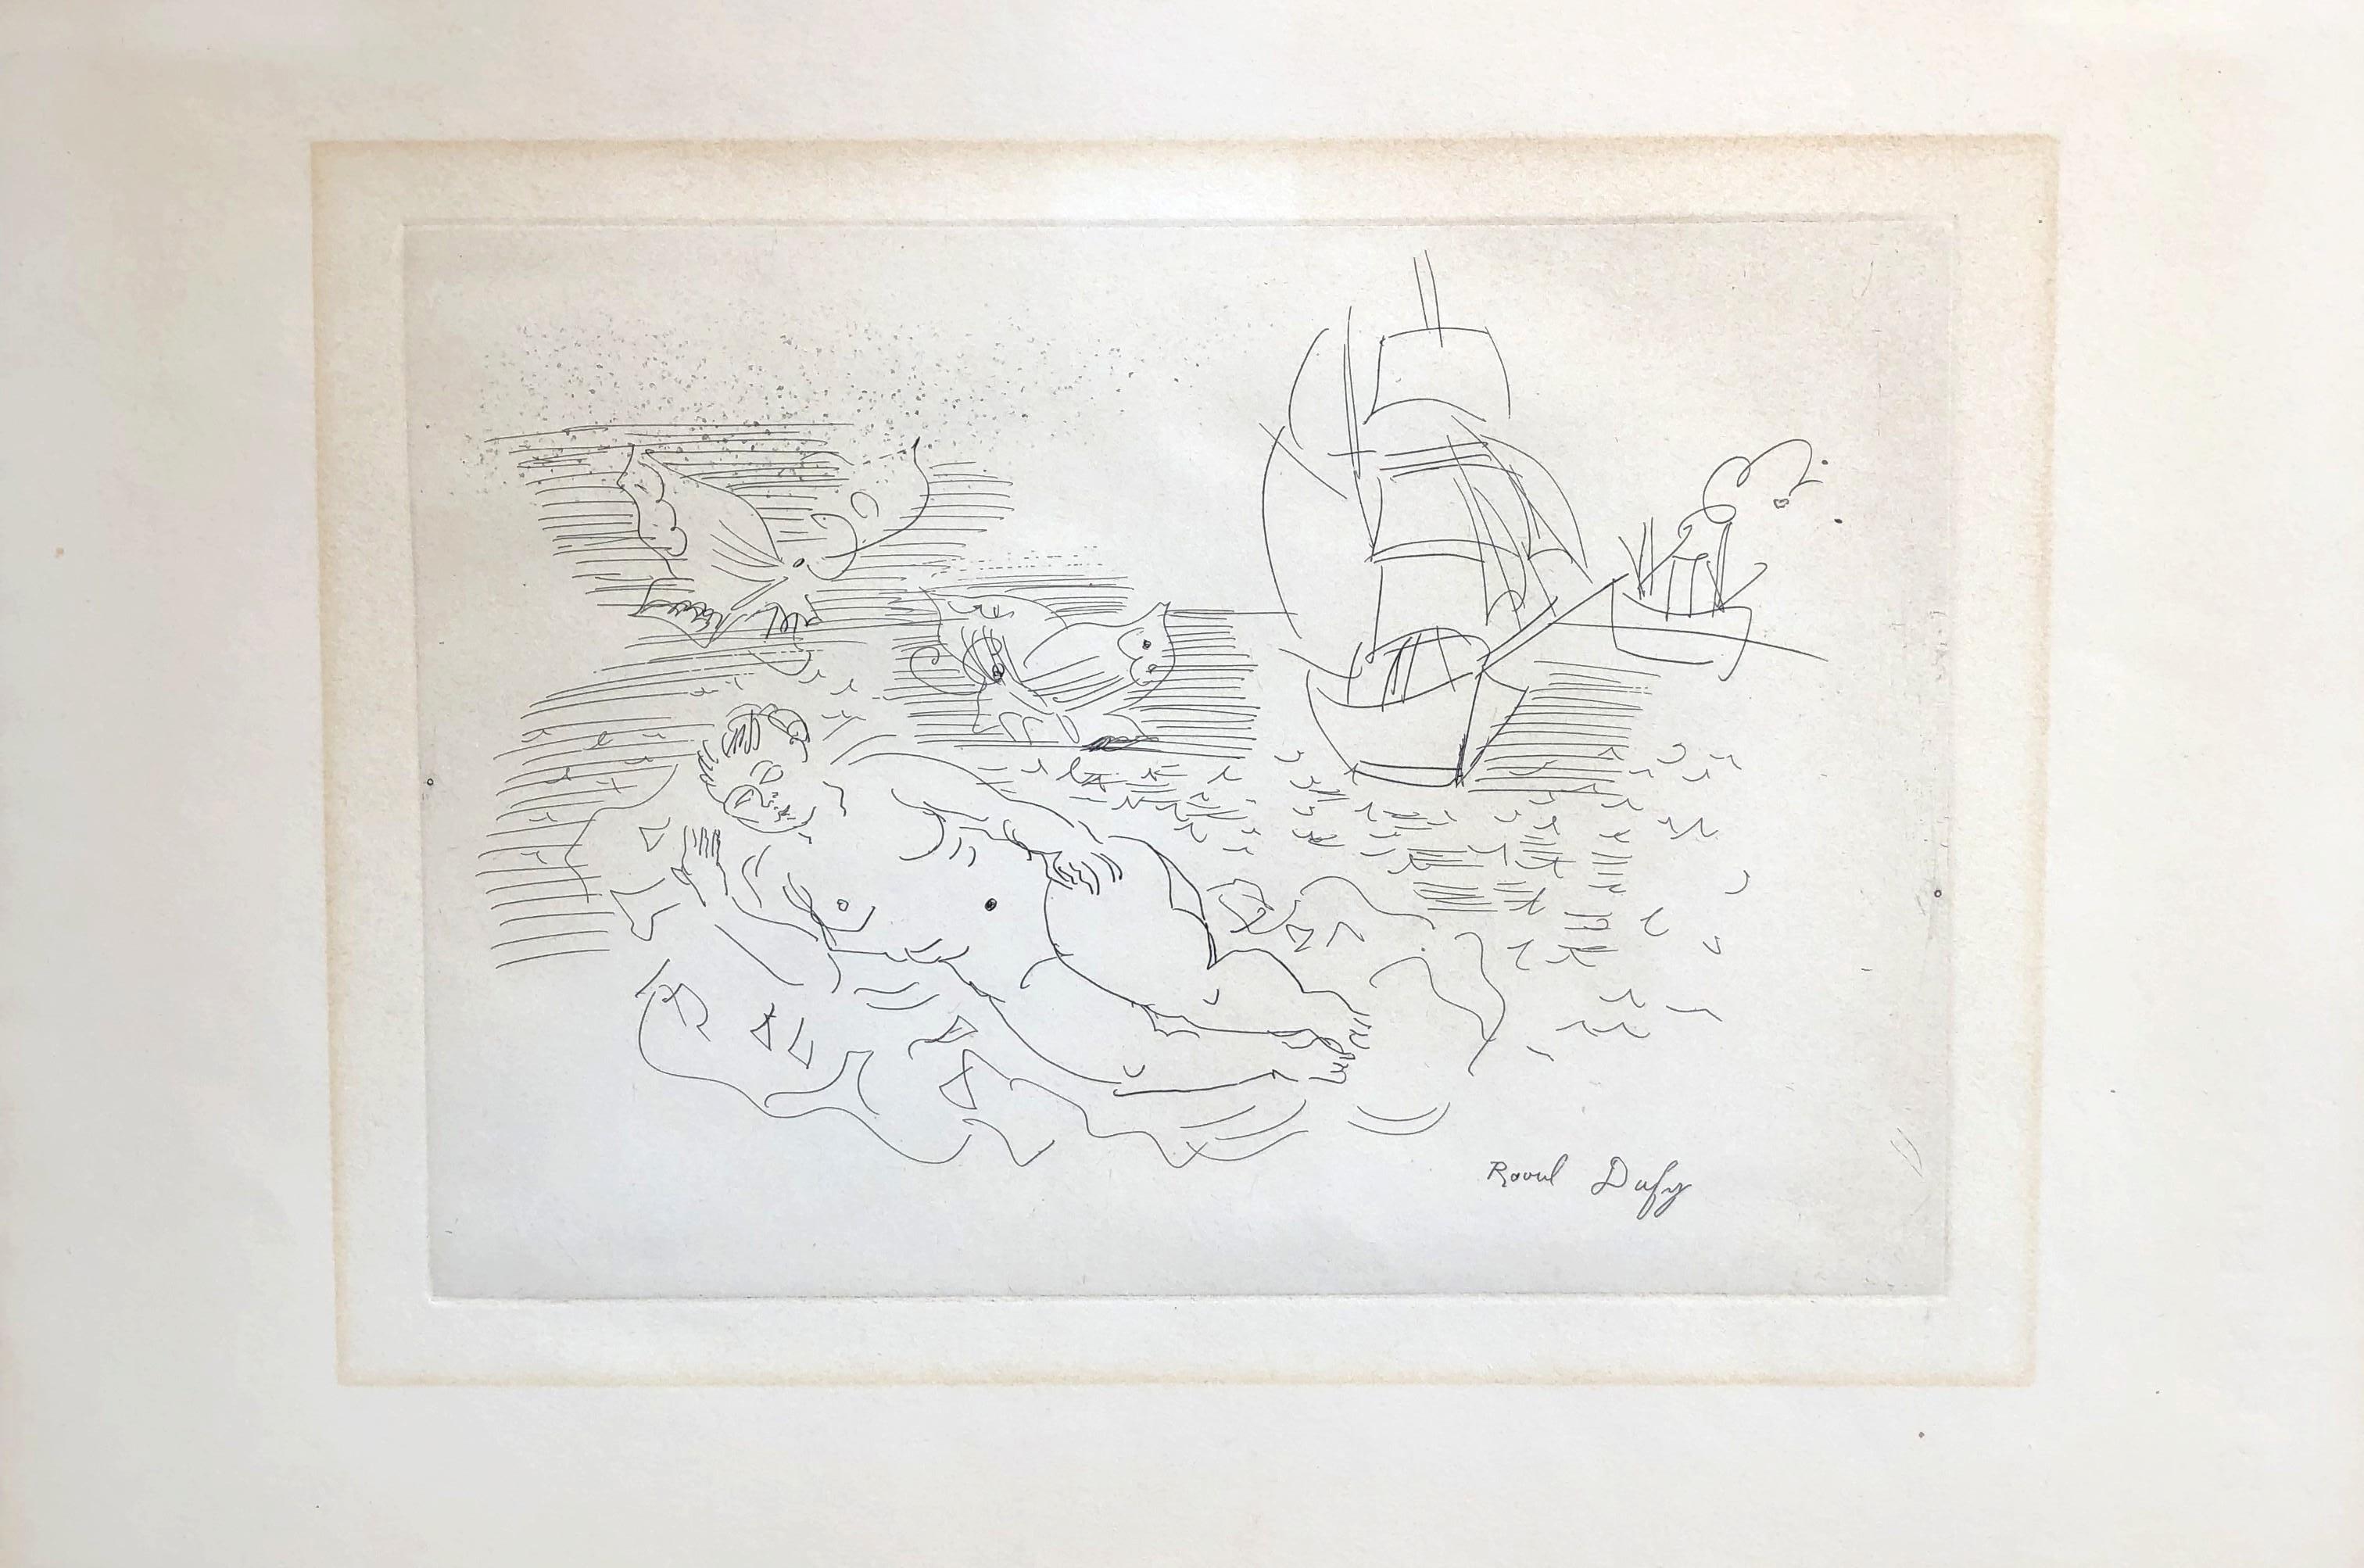 The Bather on the Beach - Original Etching - Signed in the Plate - Print by Raoul Dufy